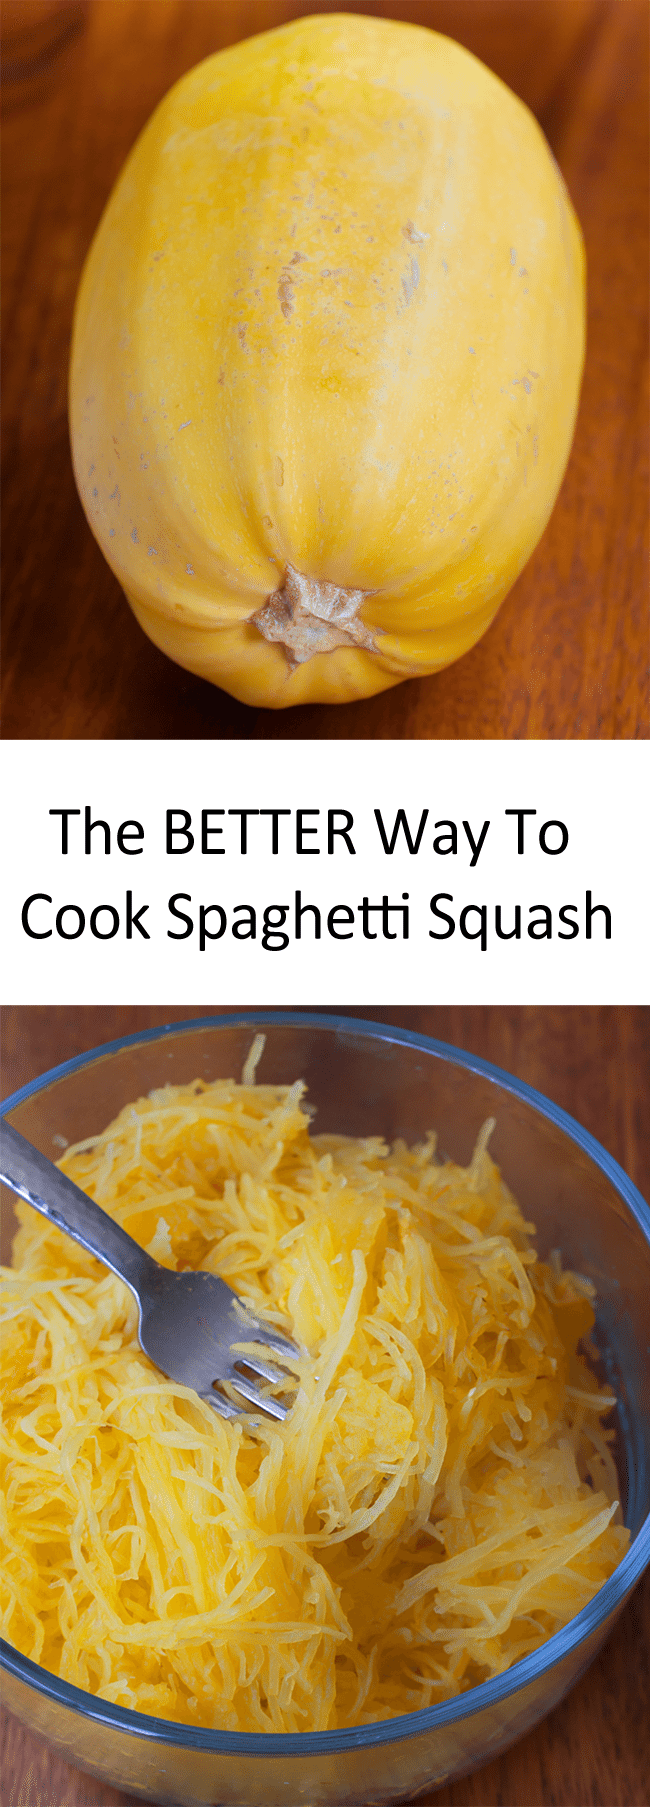 How To Cook Spaghetti Squash - The BEST Way!